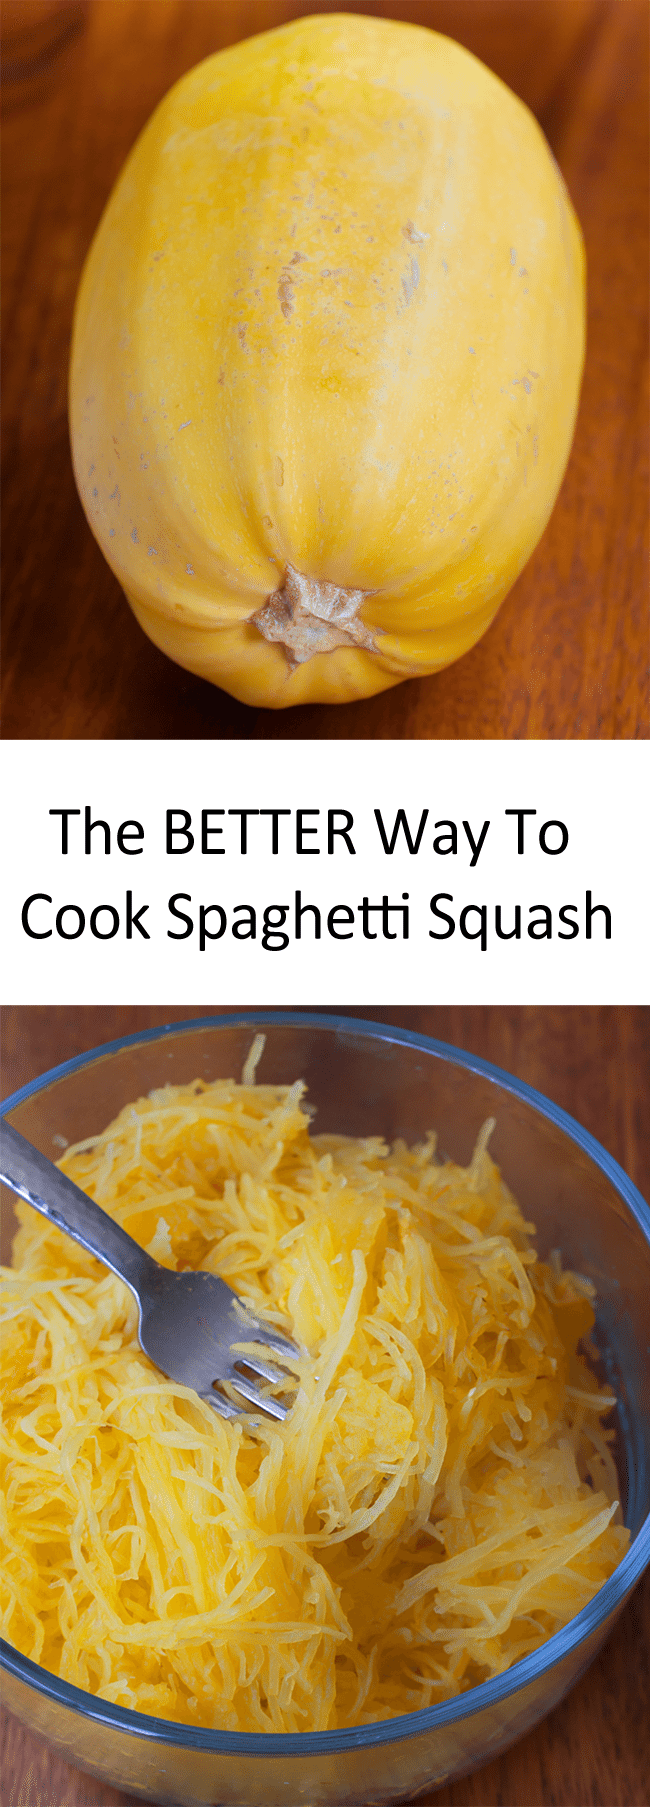 How To Cook Spaghetti Squash - The BEST Way!